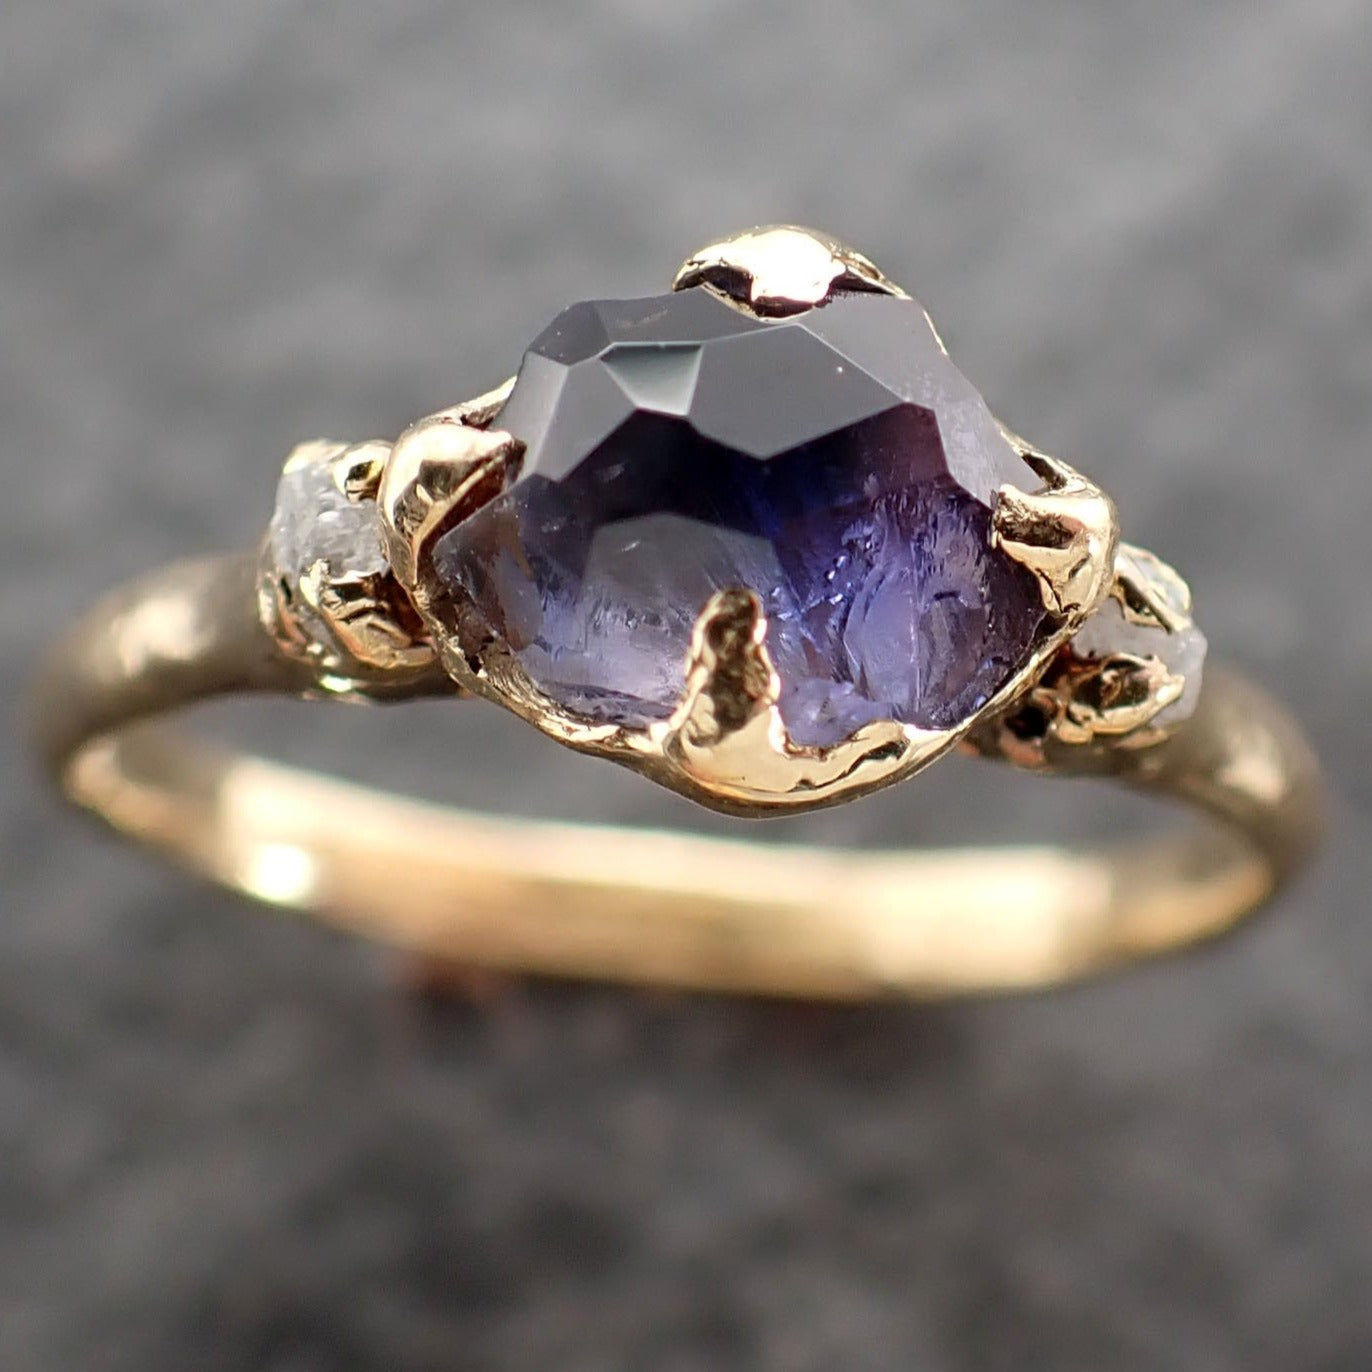 Partially Faceted Montana Sapphire rough Diamond 18k yellow Gold Engagement Wedding Gemstone Multi stone Ring 2573